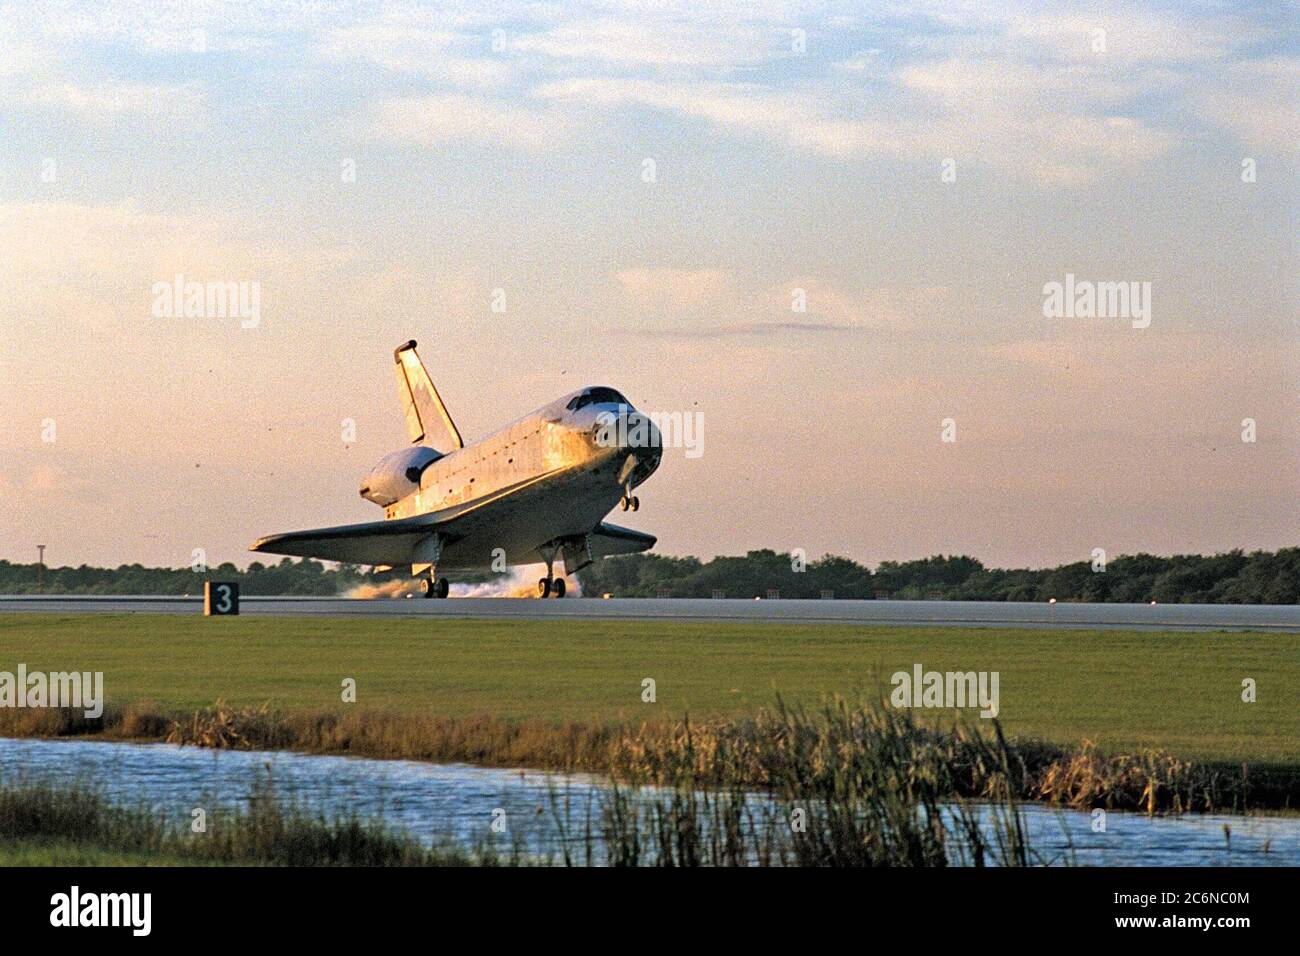 With Commander Kevin Kregel and Pilot Steven Lindsey at the controls, the orbiter Columbia touches its main gear down on Runway 33 at KSC’s Shuttle Landing Facility at 7:20:04 a.m. EST Dec. 5 to complete the 15-day, 16-hour and 34-minute-long STS-87 mission of 6.5 million miles. Also onboard the orbiter are Mission Specialists Winston Scott; Kalpana Chawla, Ph.D.; and Takao Doi, Ph.D., of the National Space Development Agency of Japan; along with Payload Specialist Leonid Kadenyuk of the National Space Agency of Ukraine. During the 88th Space Shuttle mission, the crew performed experiments on Stock Photo